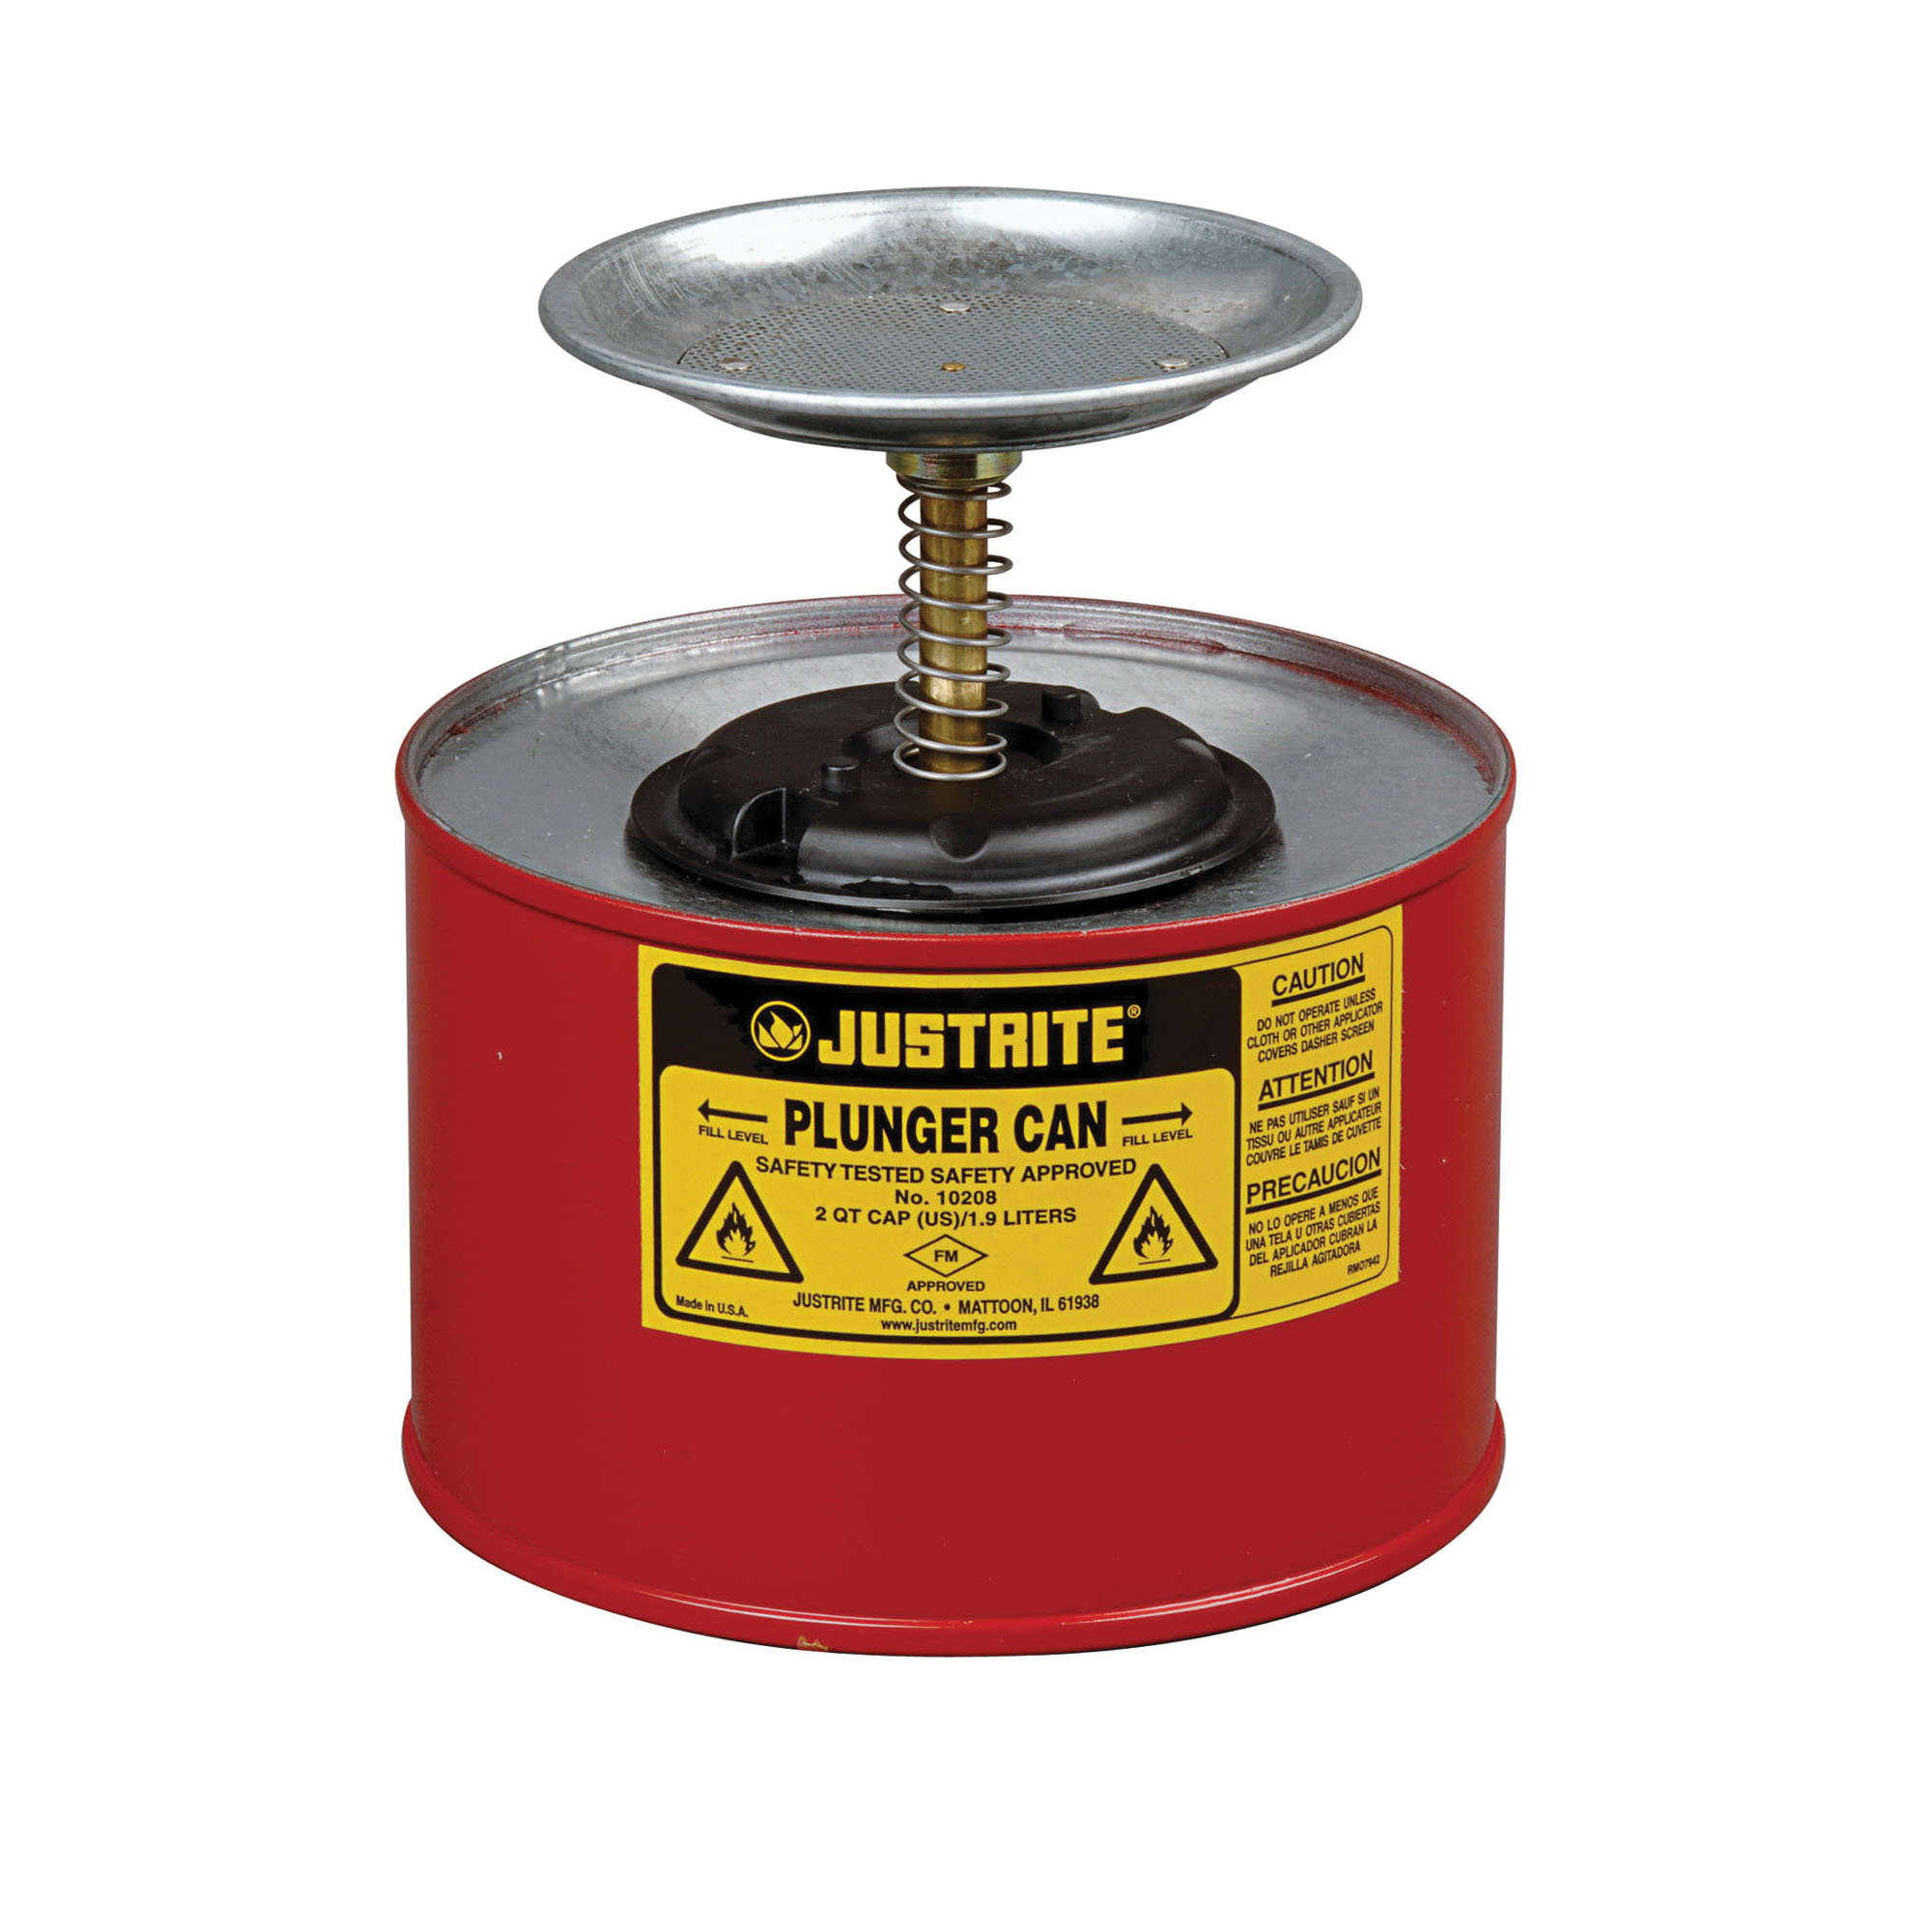 Justrite® 10108 Plunger Dispensing Can, 1 qt, Steel, Red, Brass/Ryton® Plunger, 5 in Dia Dasher Plate